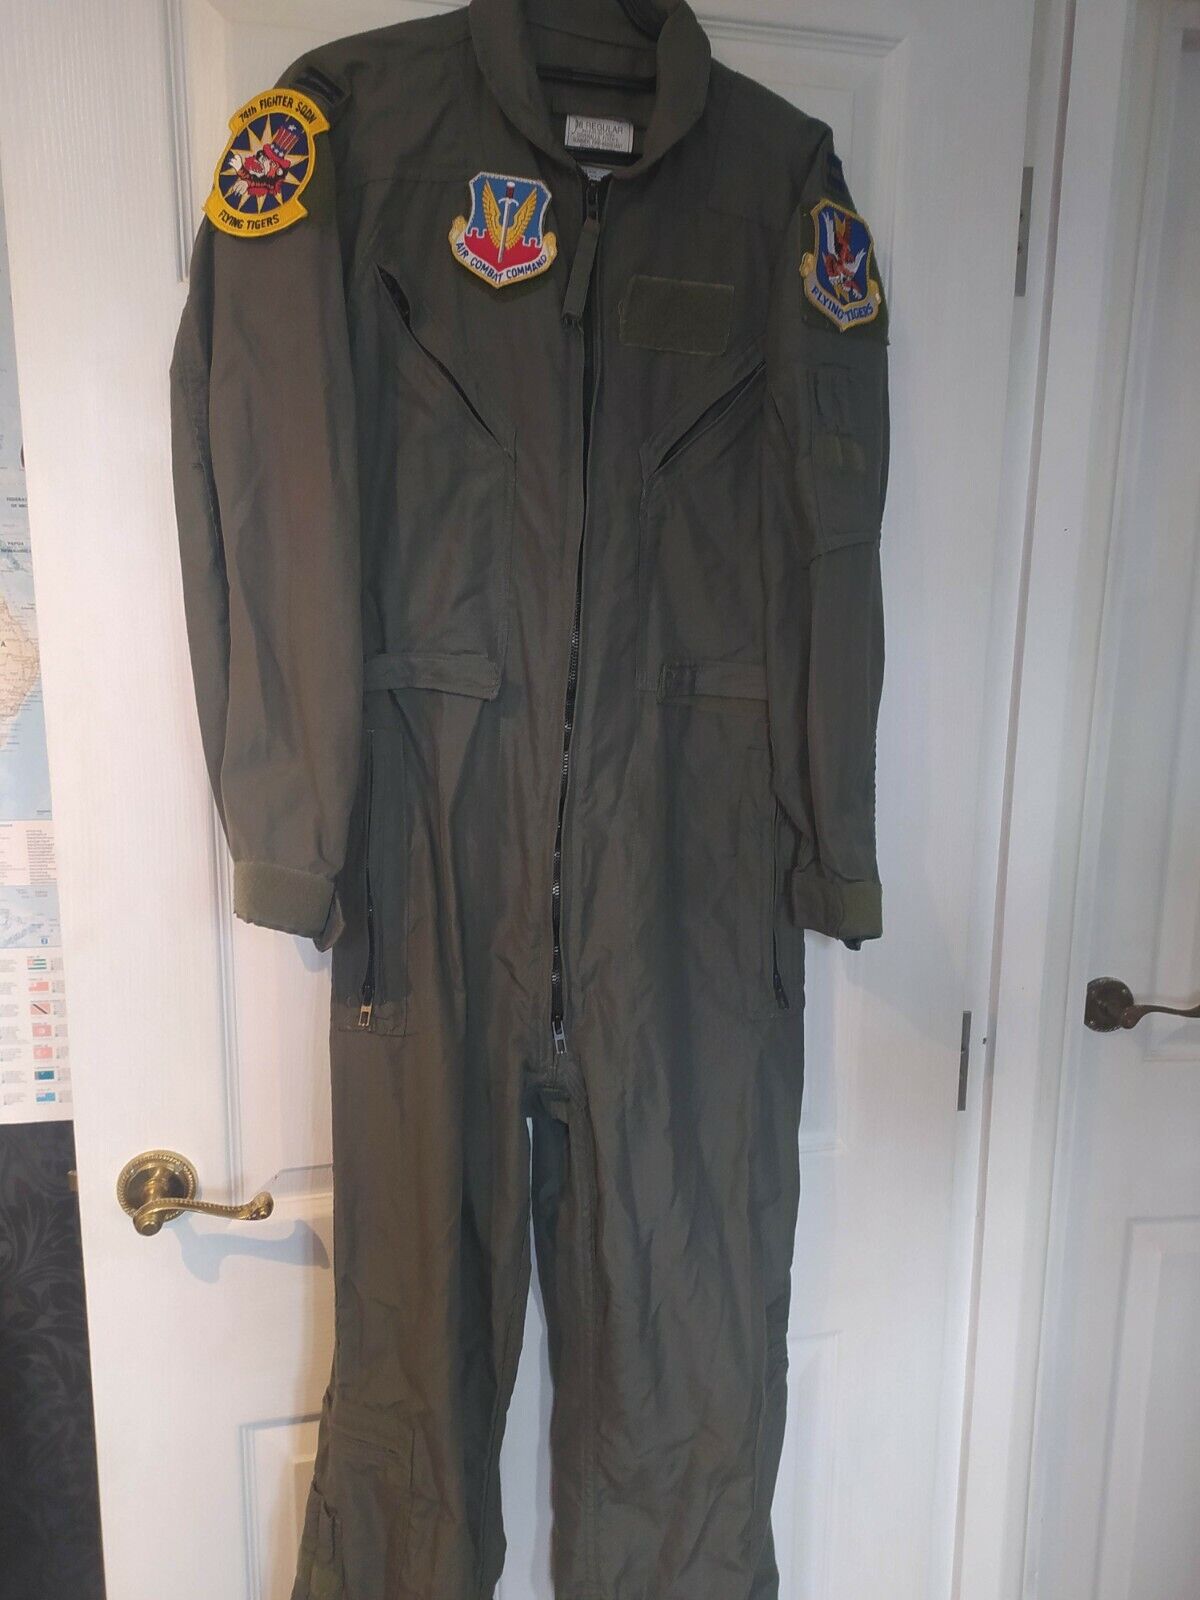 US MILITARY ISSUE COVERALLS 74th FIGHTER SQND FLYING TIGERS AIR COMBAT COMMAND 